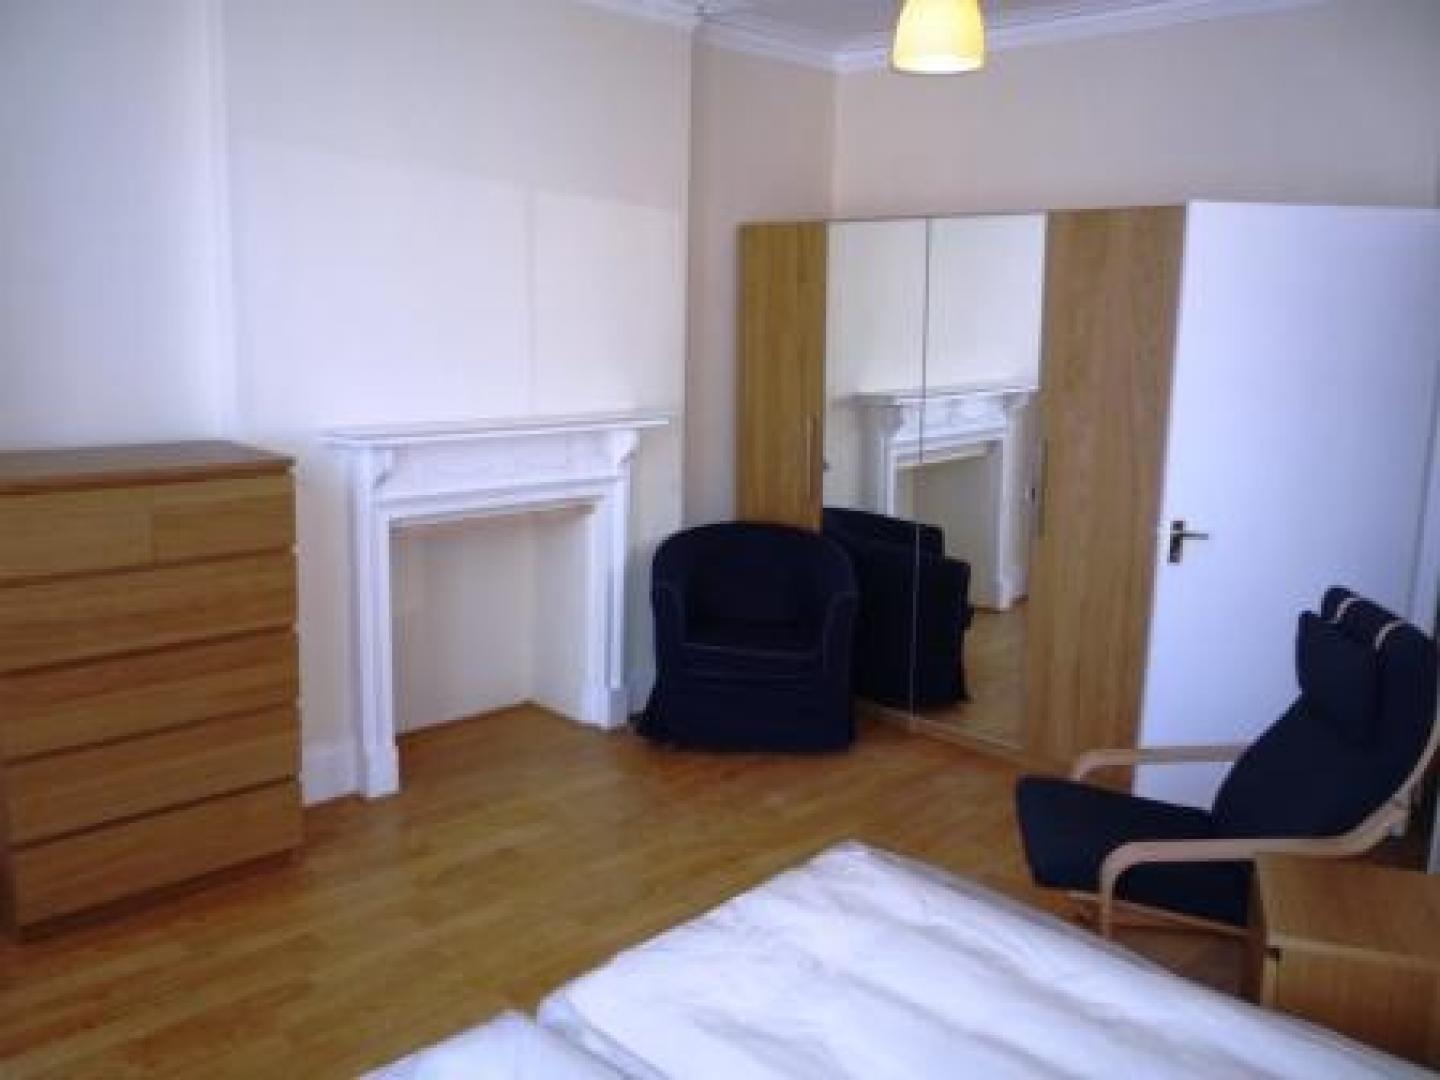 			3 Bedroom, 1 bath, 1 reception Flat			 Muswell Avenue, MUSWELL HILL